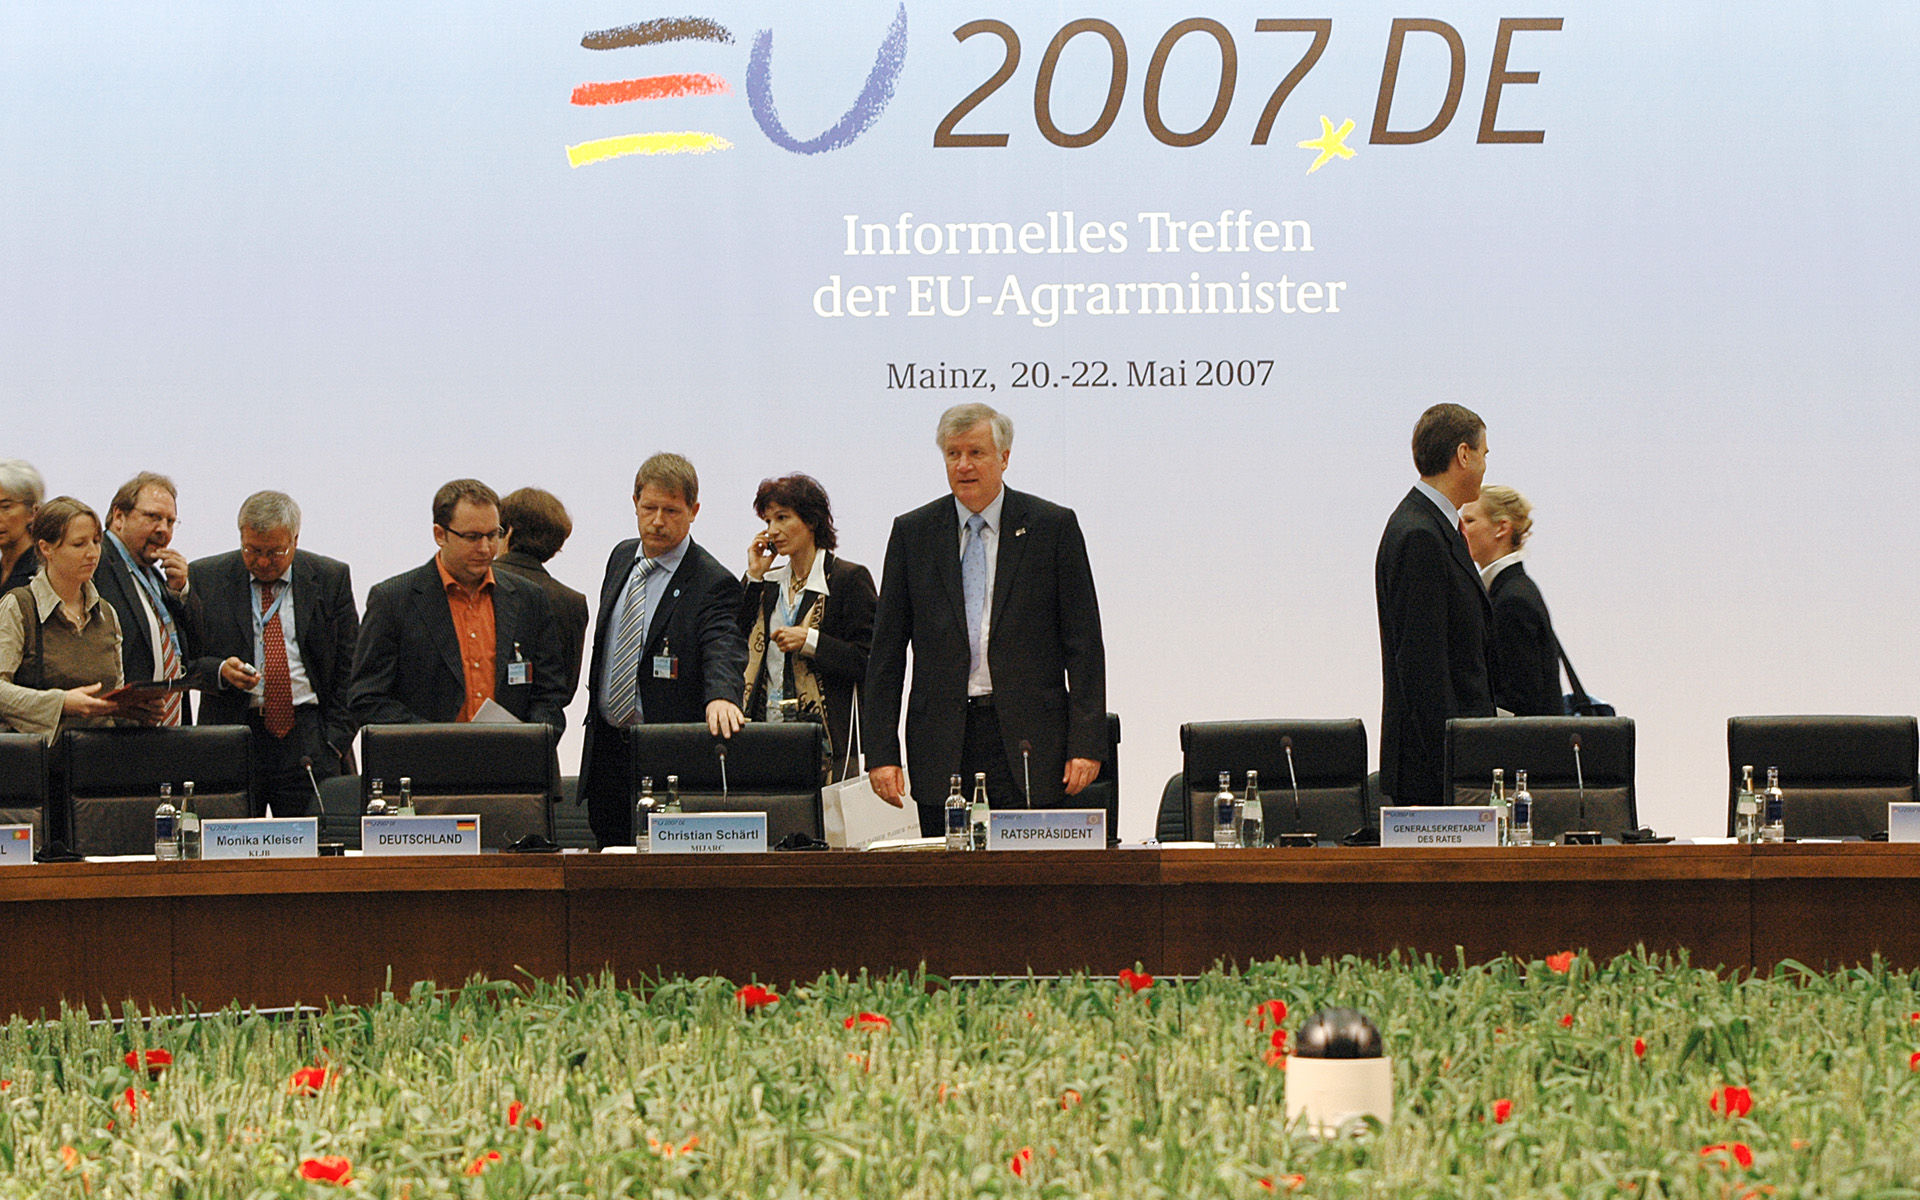 EU 2007 Meeting of EU-Agriculture Ministers in Mainz 03